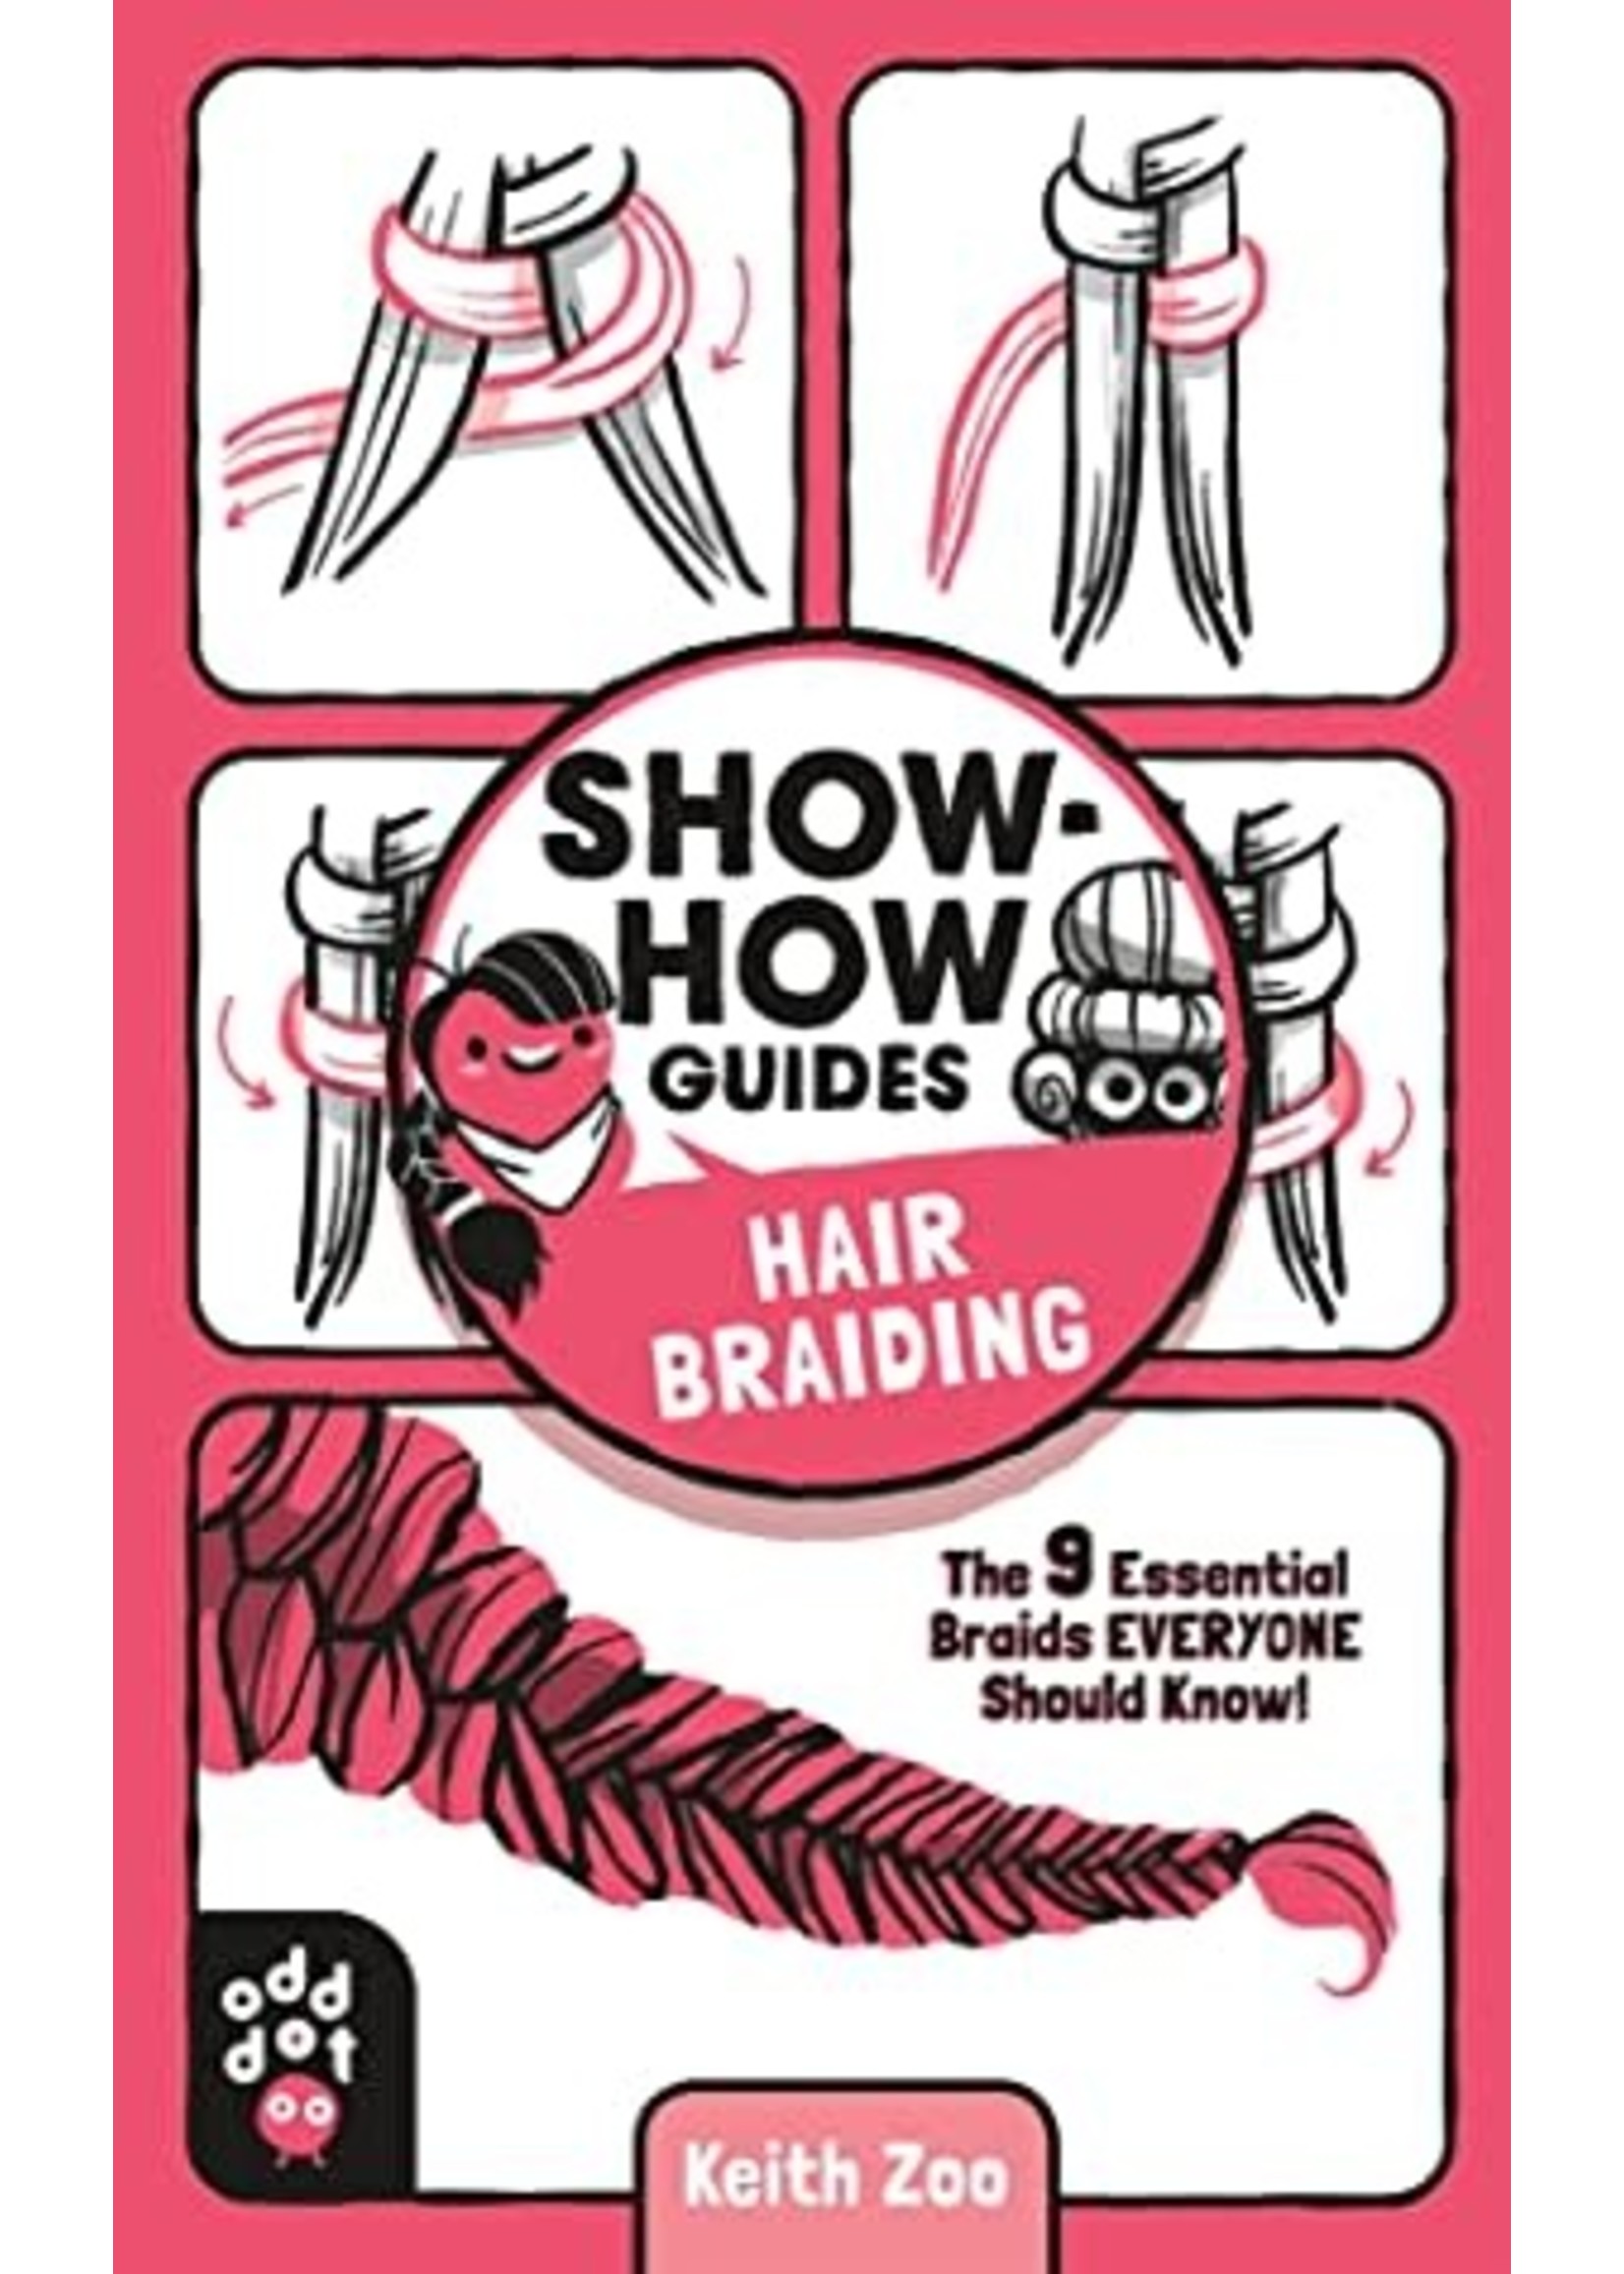 Show-How Guides: Hair Braiding: The 9 Essential Braids Everyone Should Know! by Keith Zoo